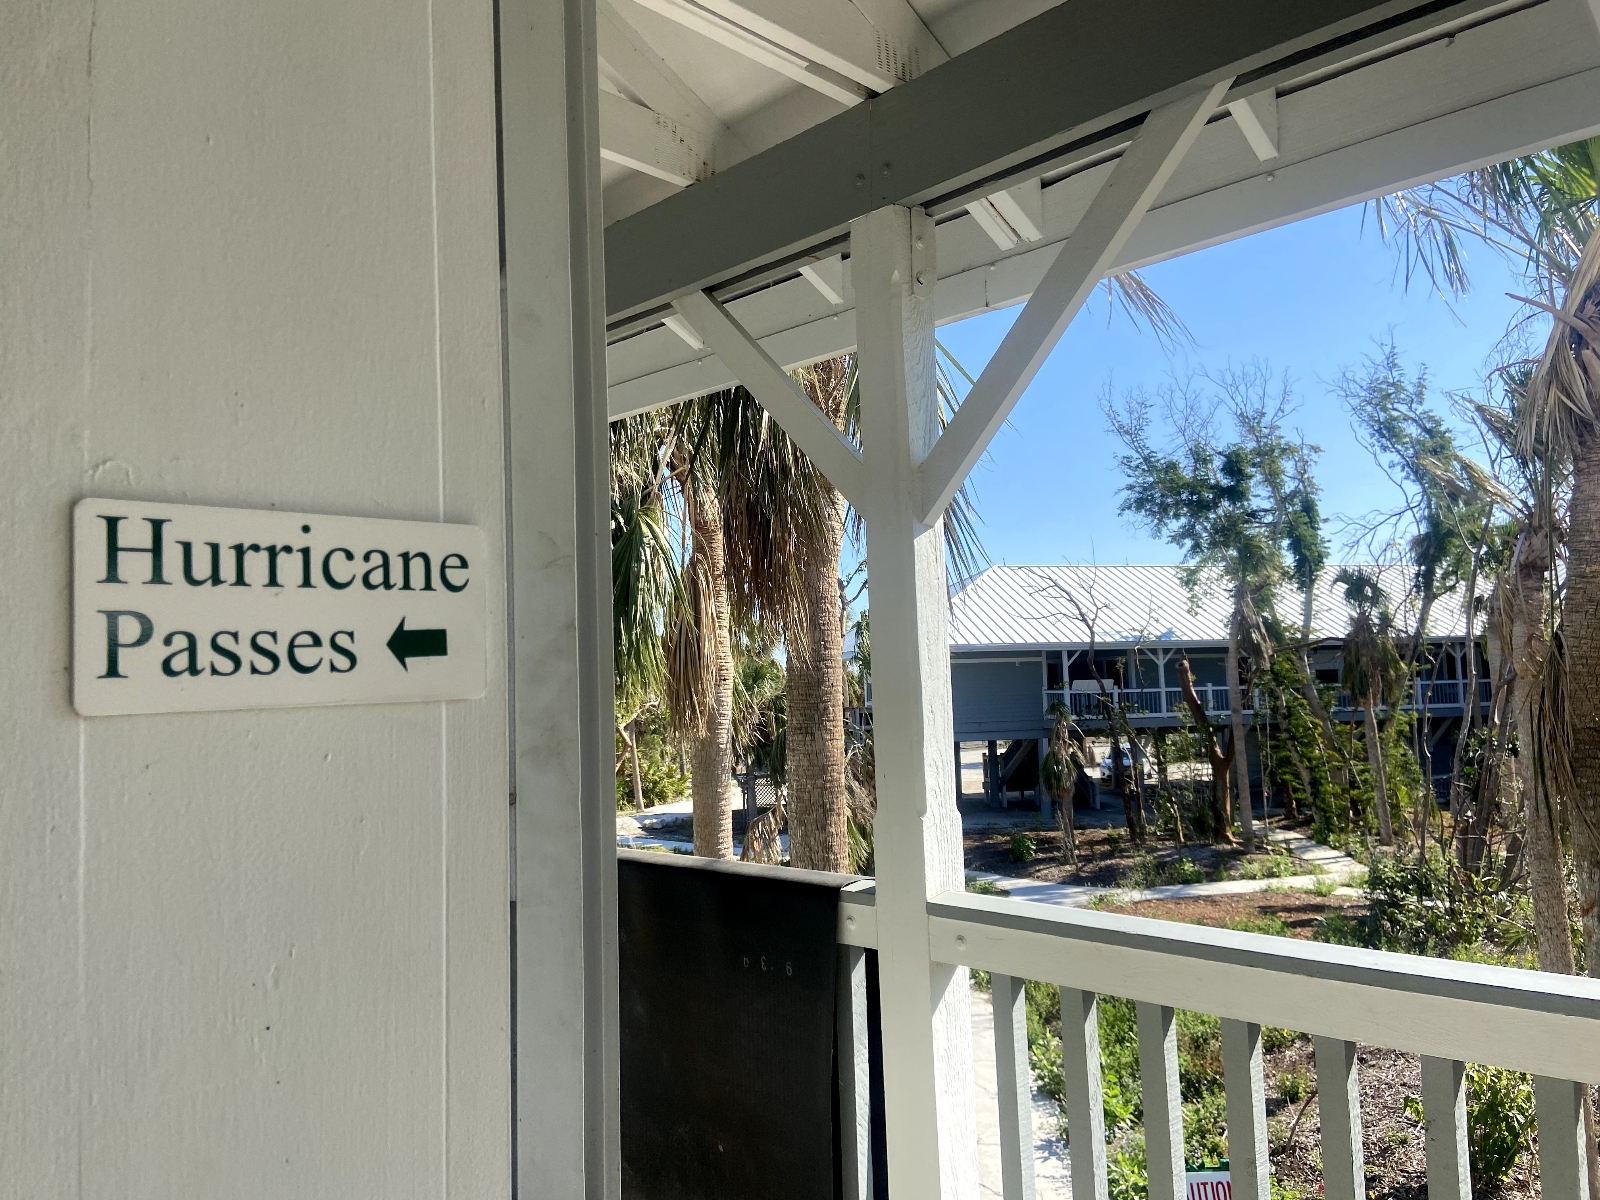 A white sign with black letters that reads “Hurricane Passes” hangs outside Sanibel City Hall. The damage from Hurricane Ian’s wind can be seen in the battered trees in the background. Sanibel officials limited access to the wealthy community by issuing hurricane passes to workers involved in the recovery effort.